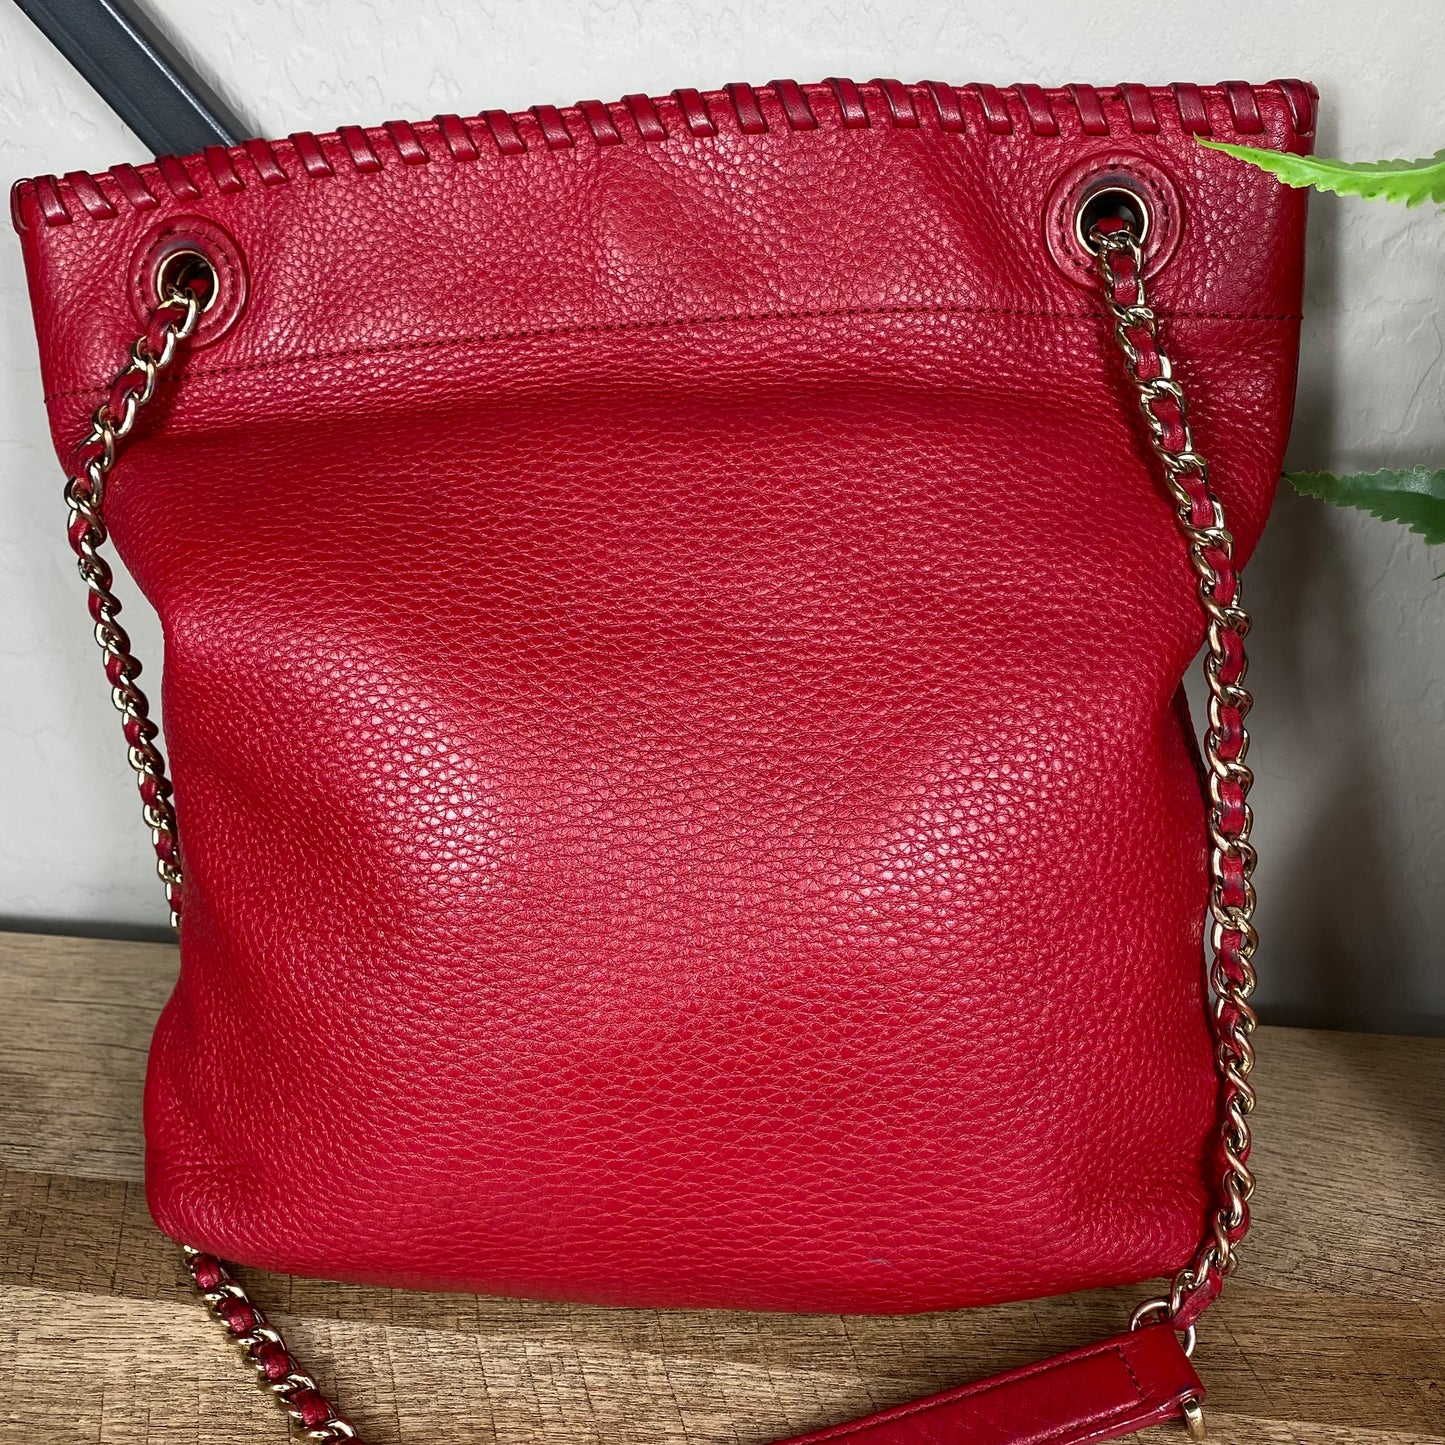 Tory Burch Leather Whipstitch Marion Bag